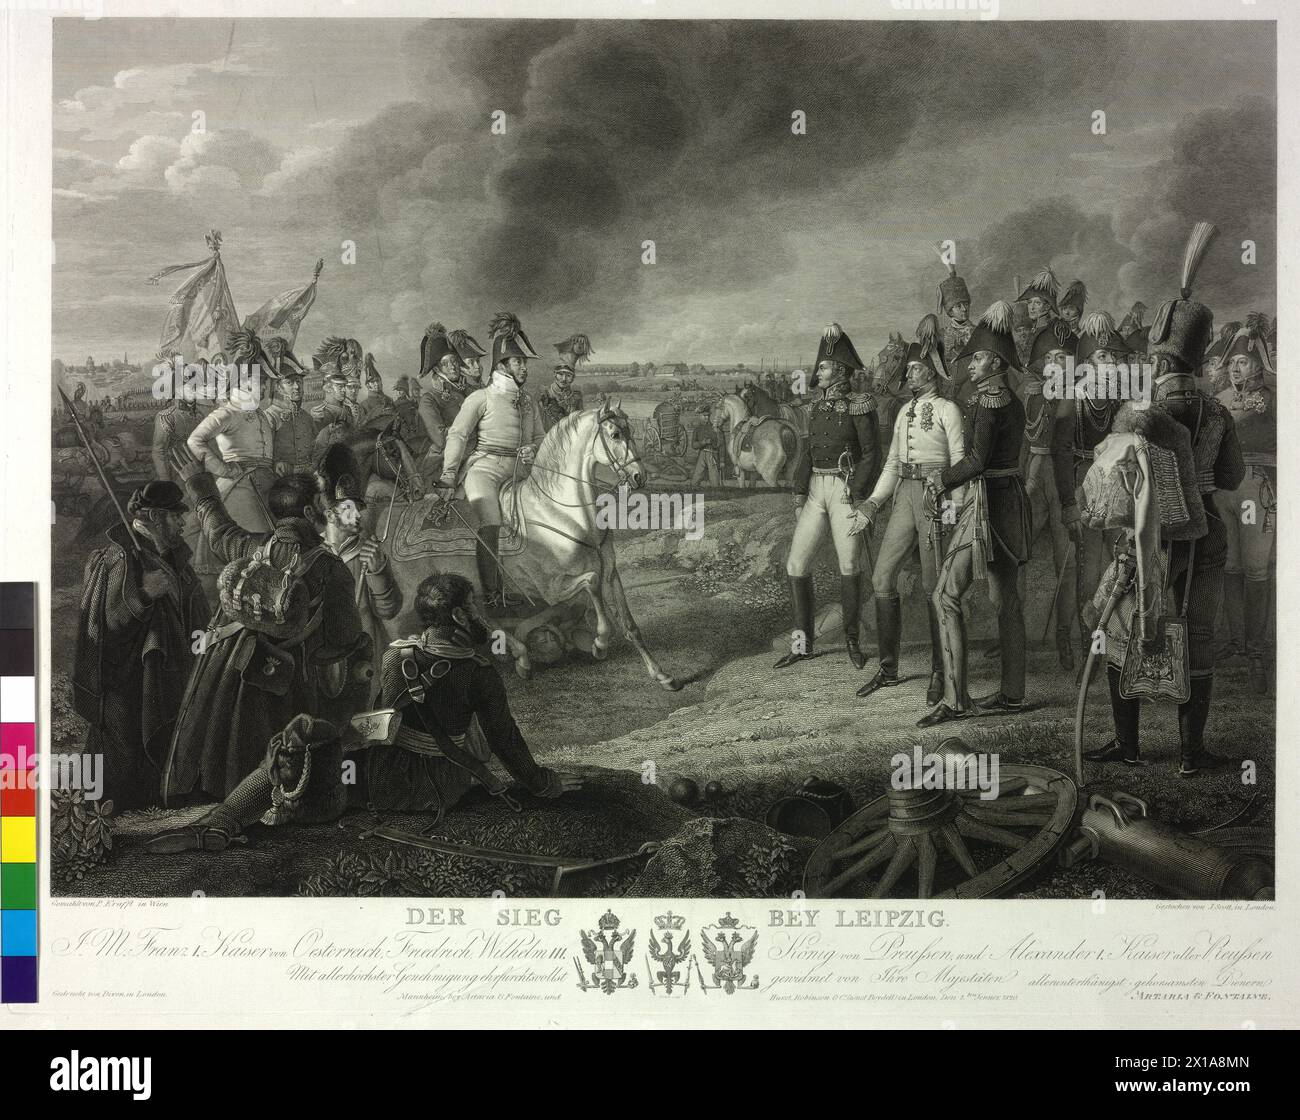 Battle of Leipzig, field marshal Charles Philipp prince of Schwarzenberg notify the allies sovereign the victory in the battle of Leipzig (19.10.1813), engraving by John Scott based on a painting by Johann Peter Krafft. crest thrusting from (James / Jack) Girtin. print: Dixon, London. person key page Pk 3003, 413a, 1820 - 18200101 PD0321 - Rechteinfo: Rights Managed (RM) Stock Photo